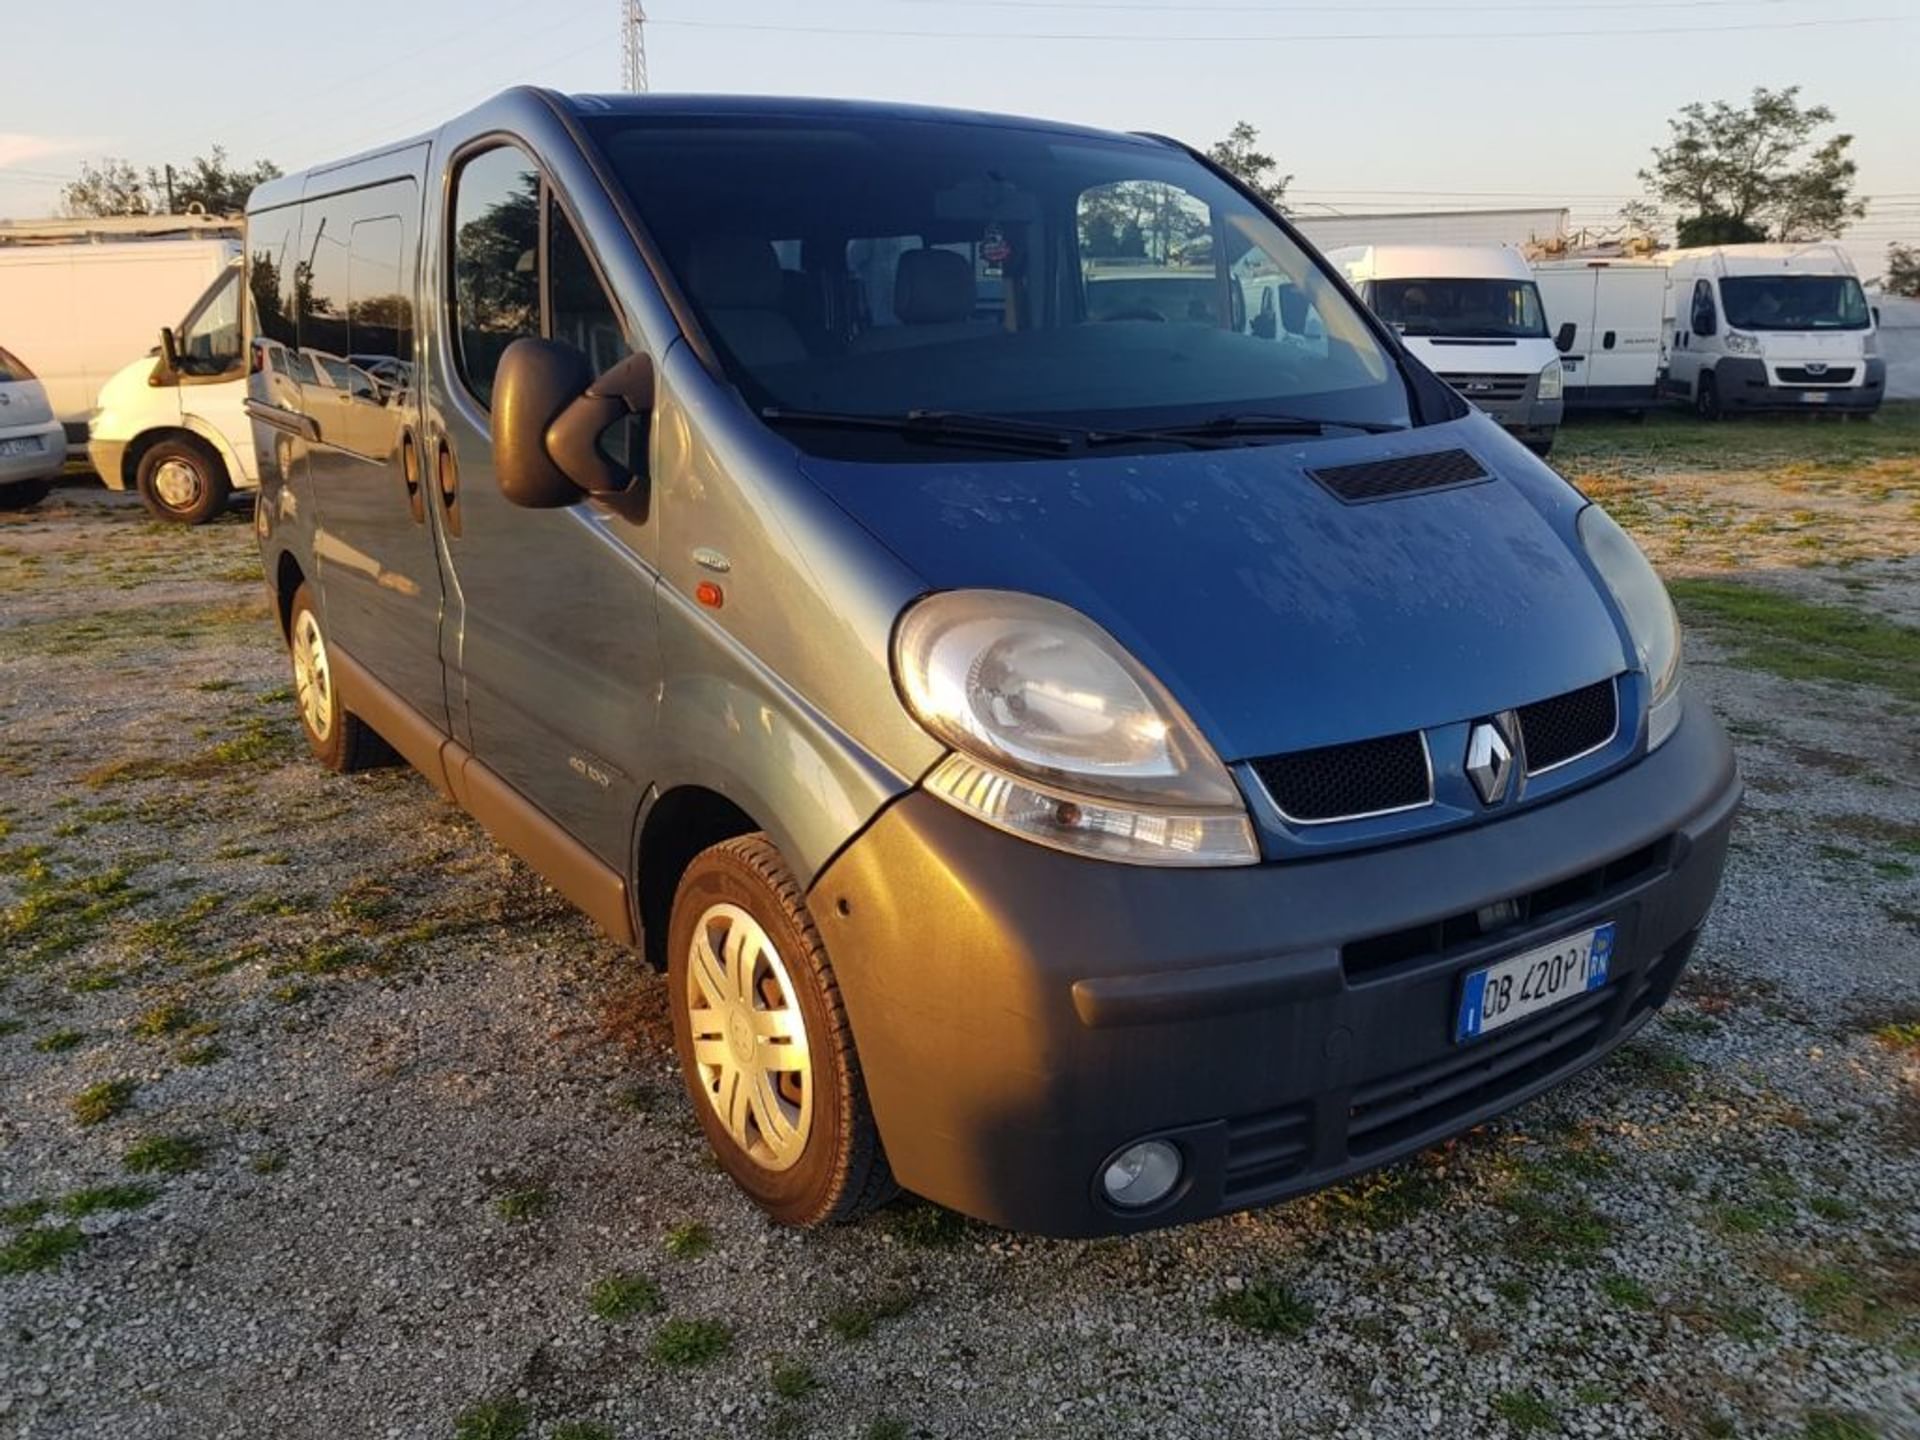 Renault Trafic 1.9dCi